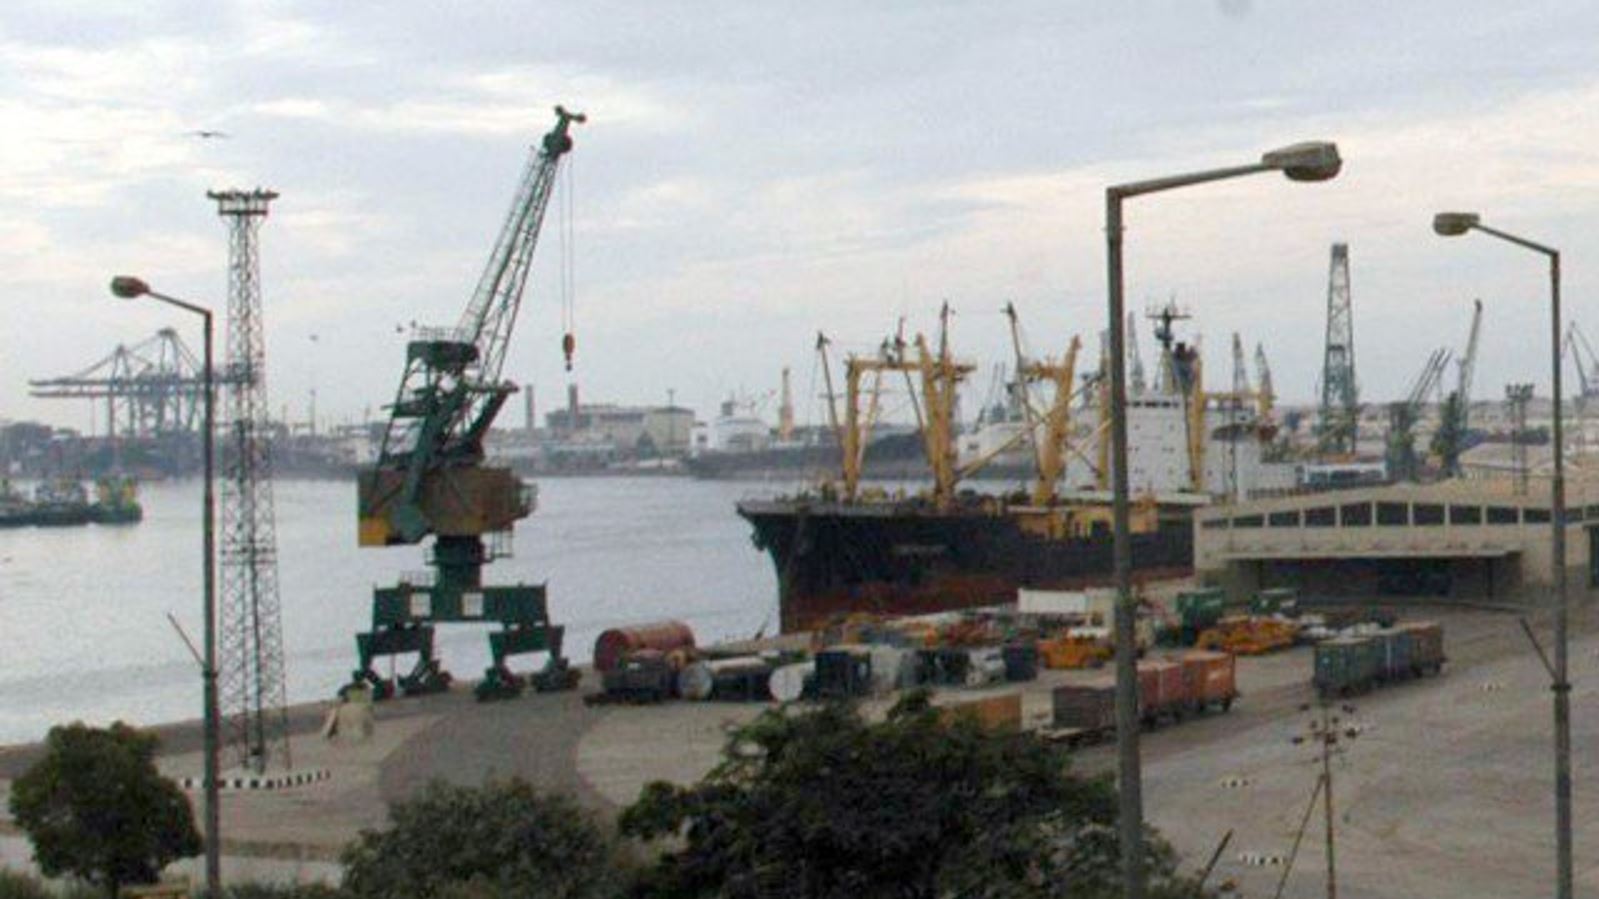 Port Qasim LNG terminal to resume work after plugging leakage | Sui ...